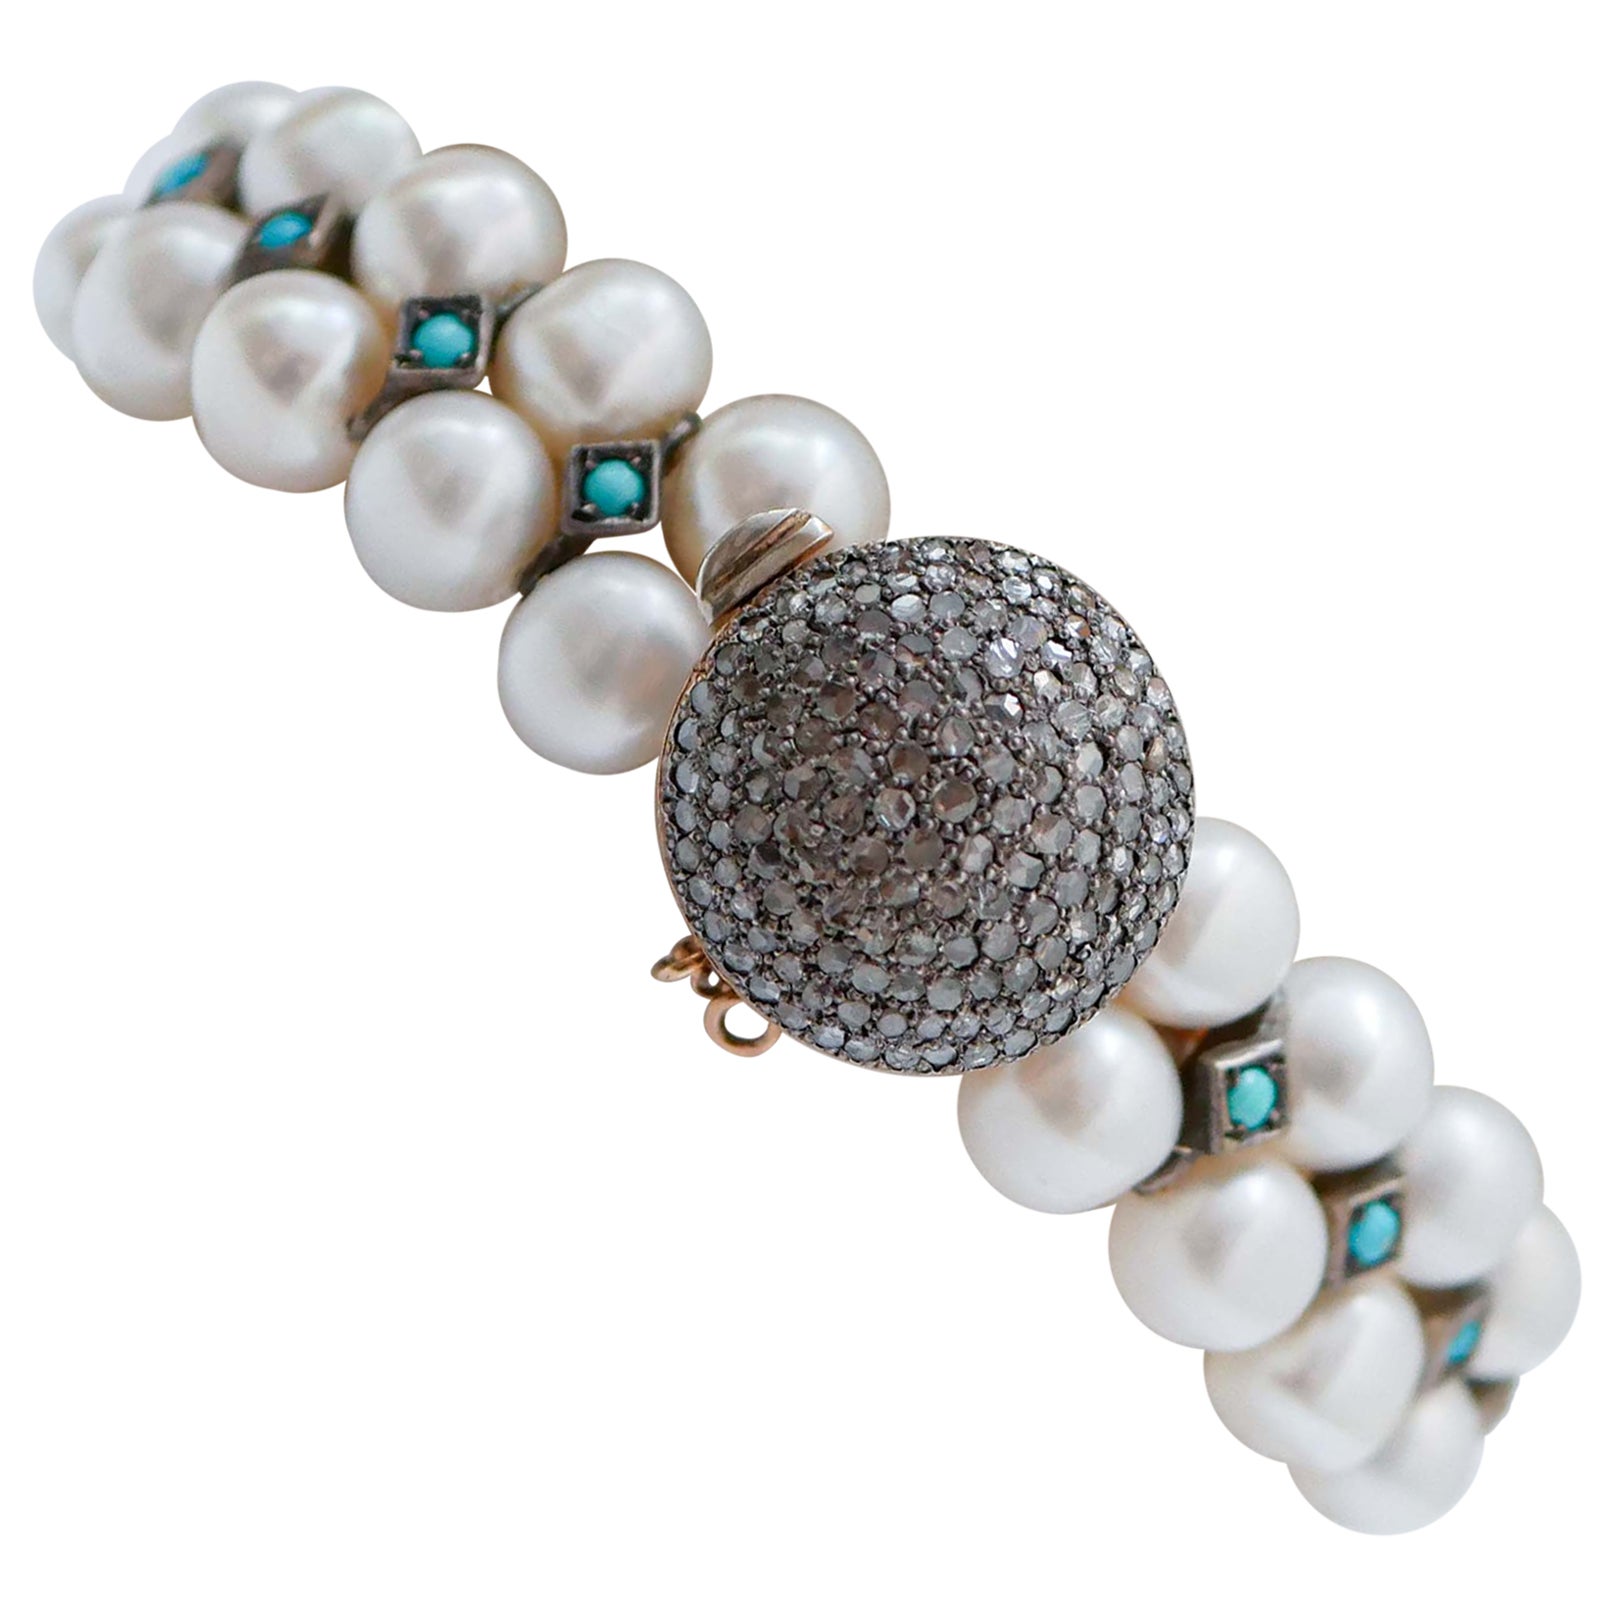 Pearls, Turquoise, Diamonds, Rose Gold and Silver Bracelet. For Sale